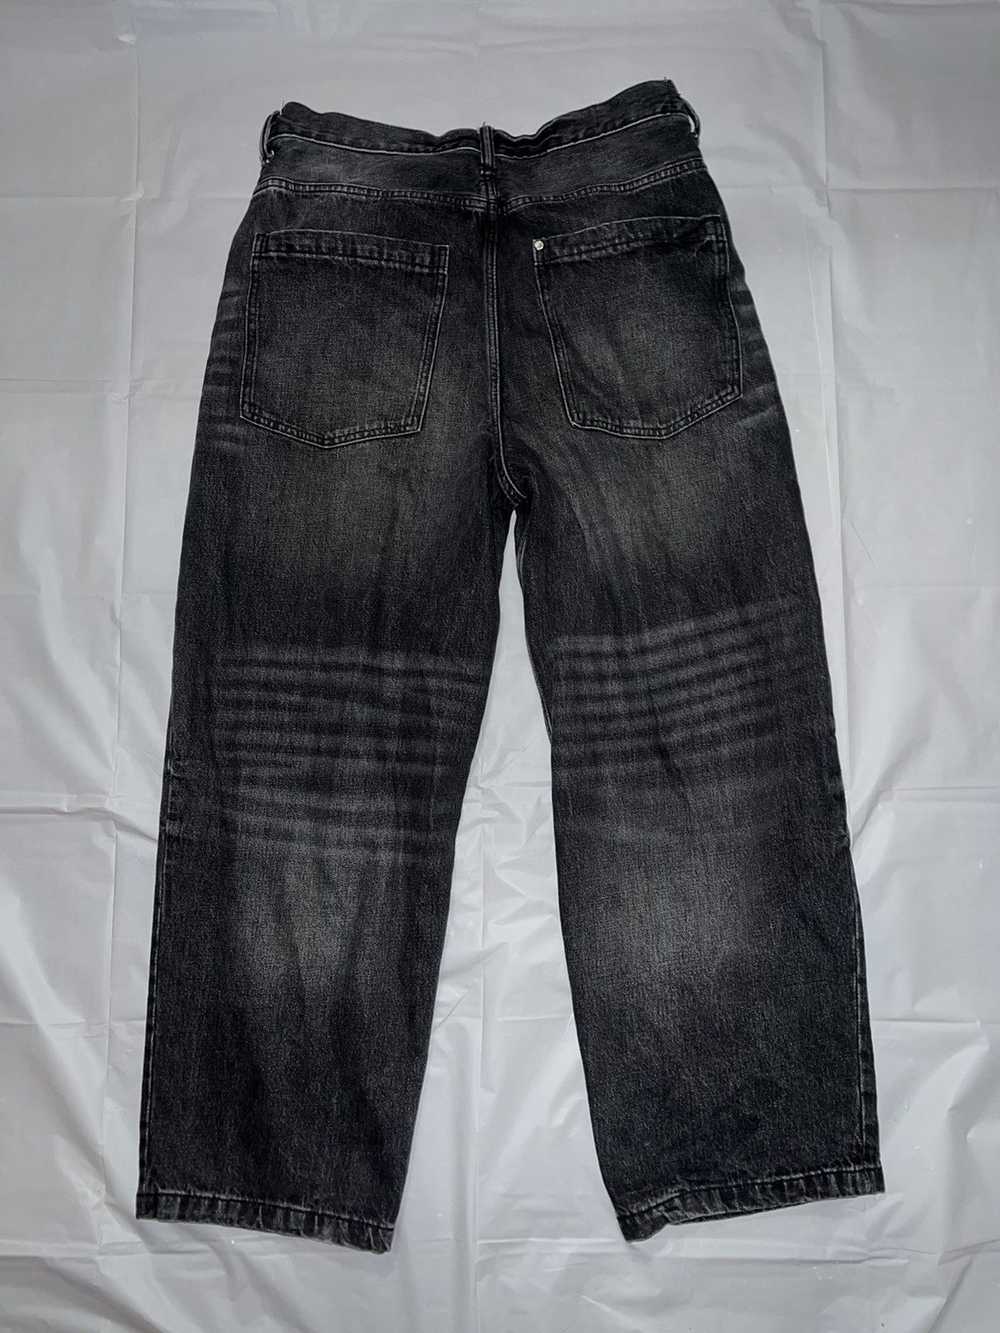 H&M H&M Faded Baggy Denims size 34x30 - image 3